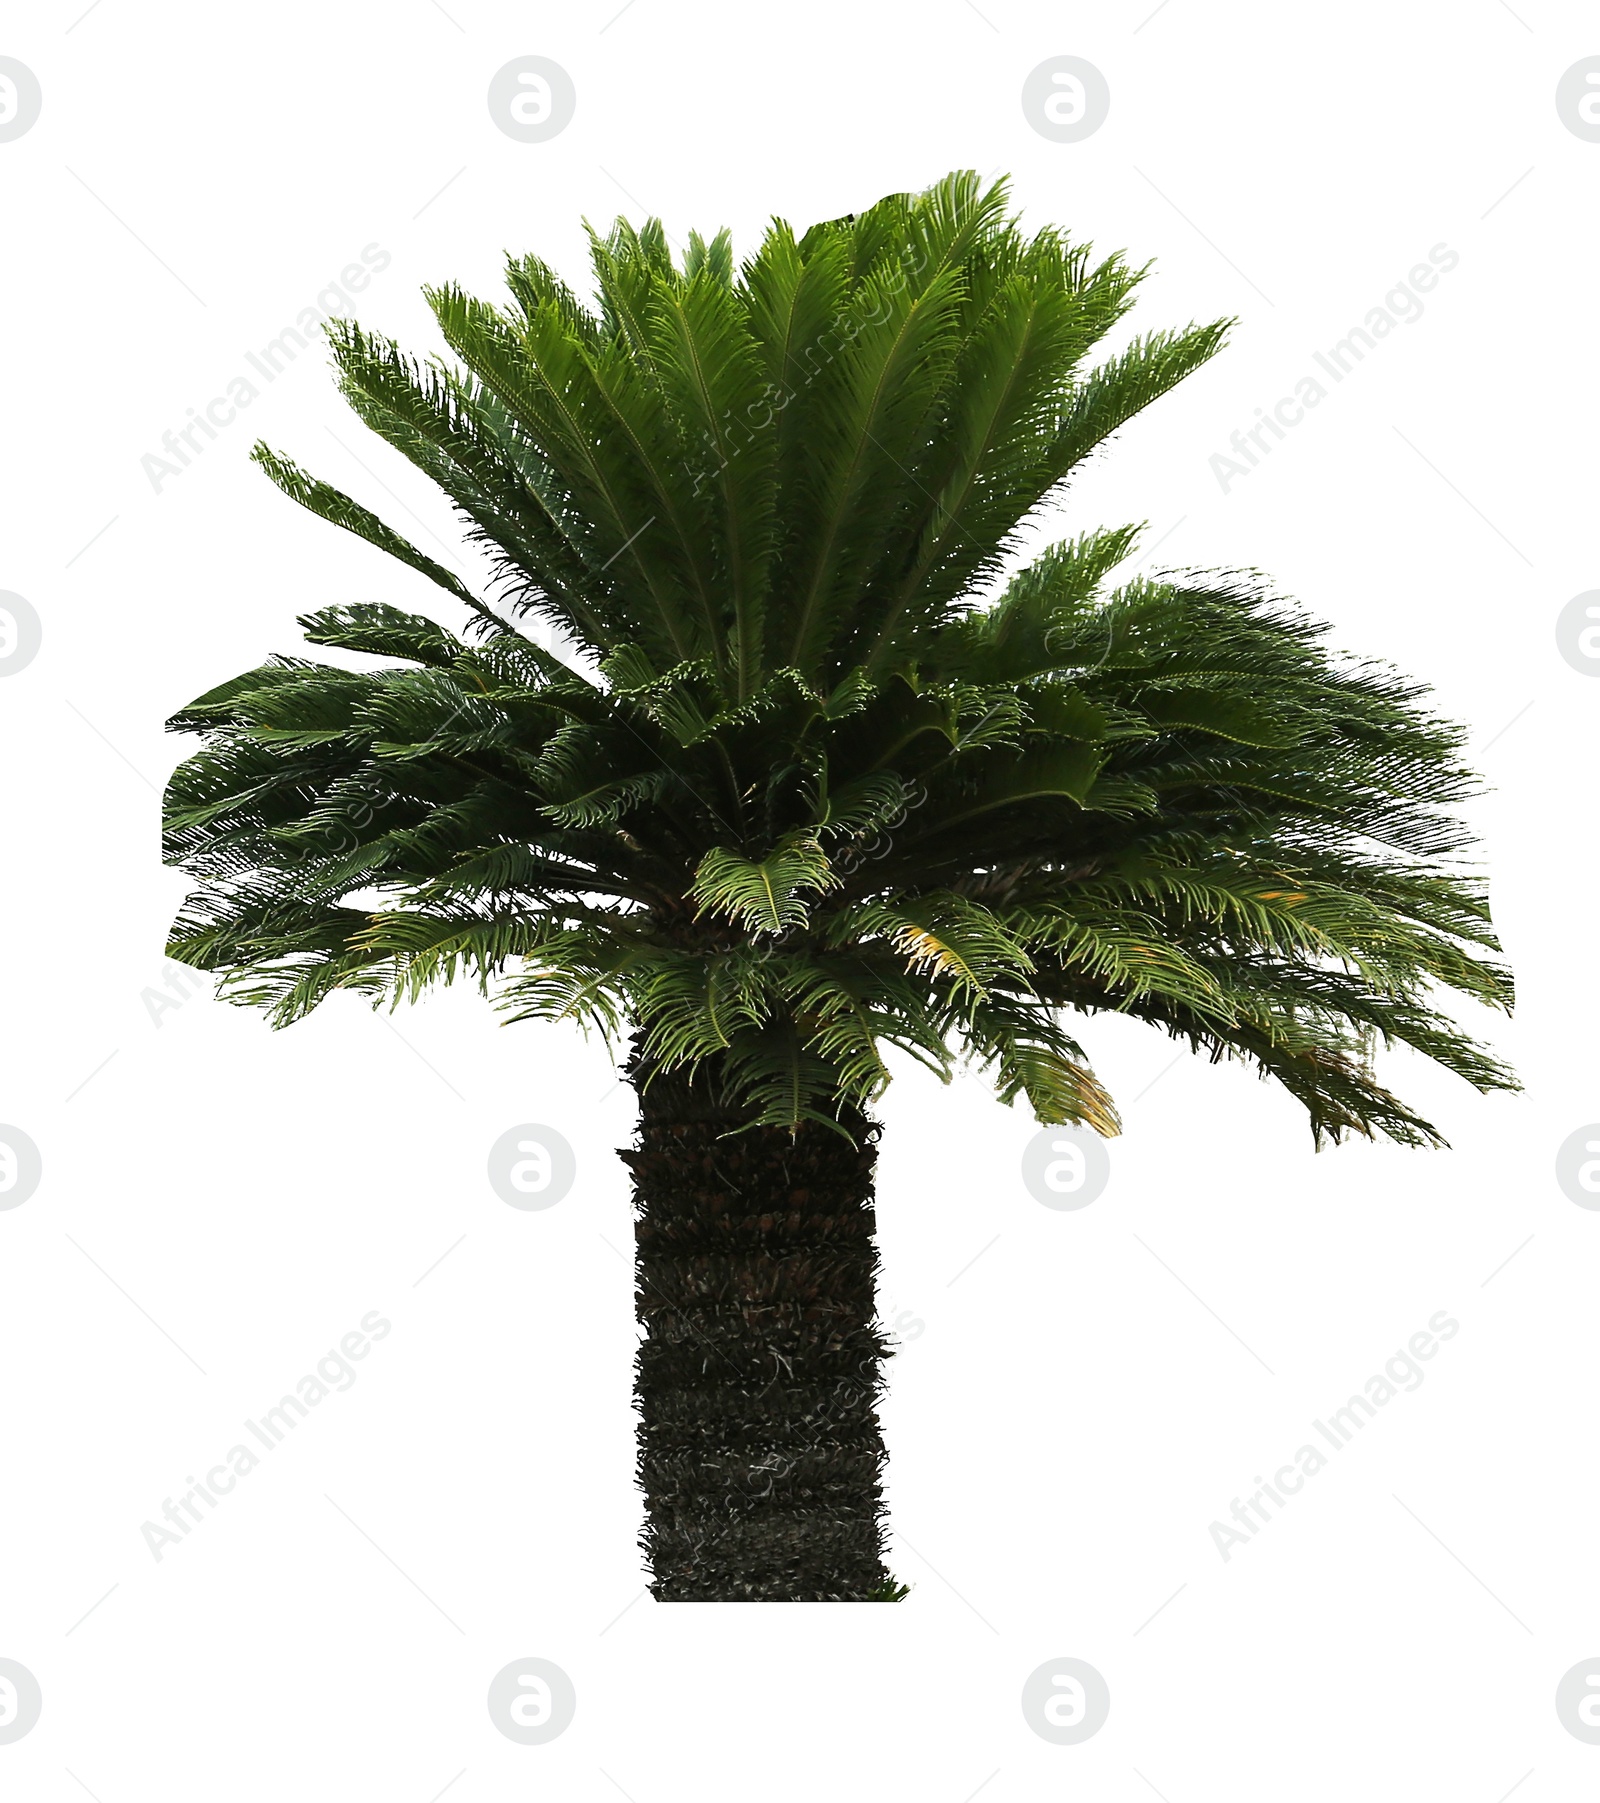 Image of Beautiful palm tree with green leaves isolated on white